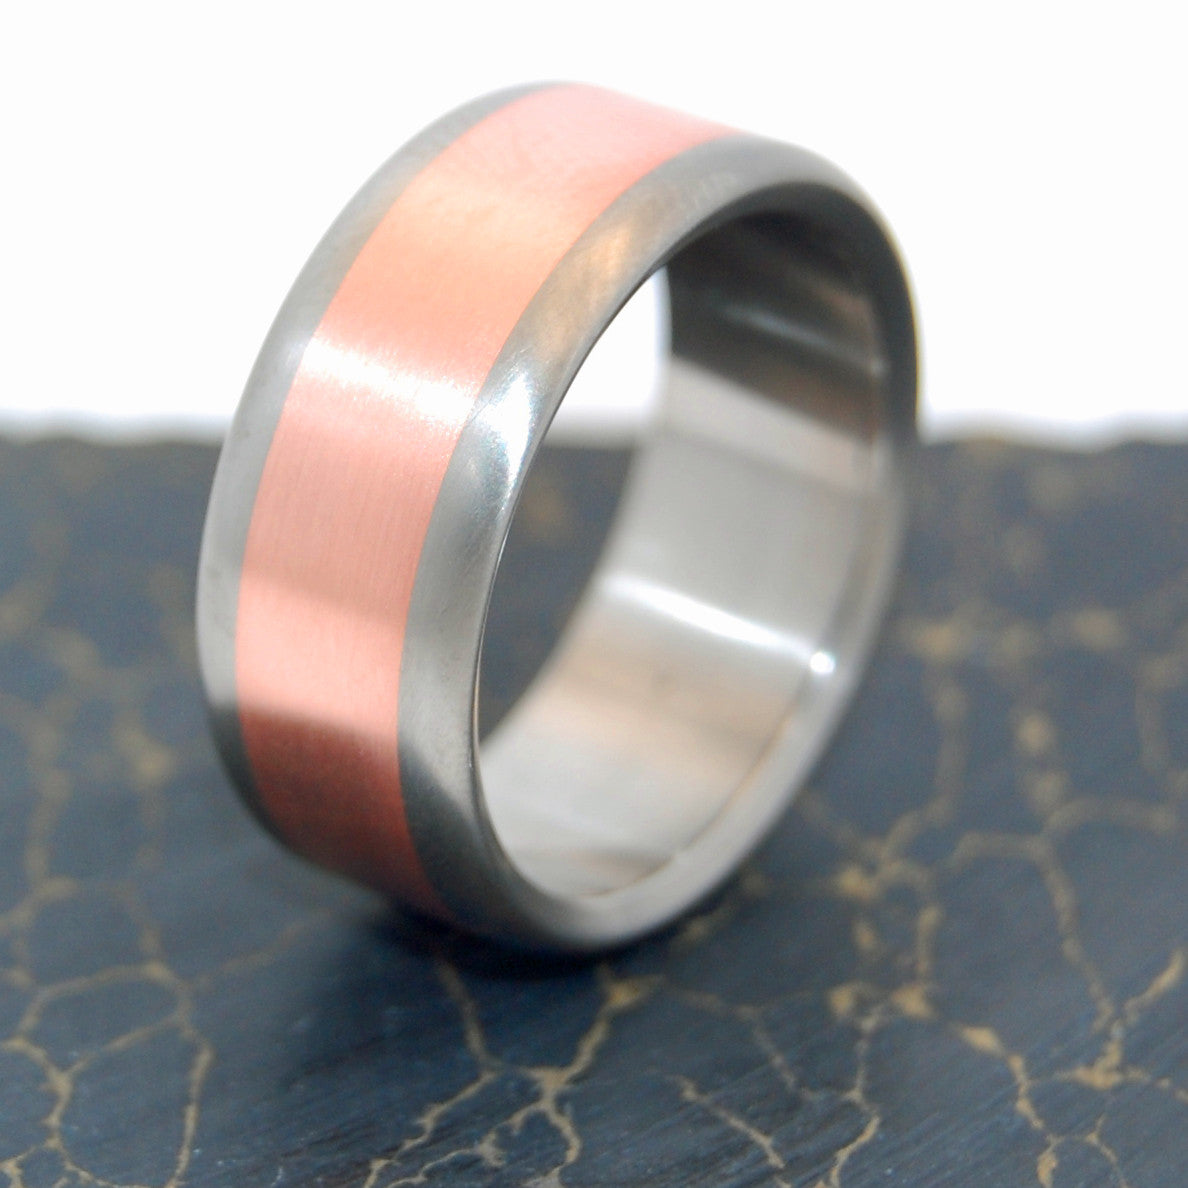 Mens Wedding Ring - Copper and Titanium Wedding Ring Set | CANDLELIGHT SATIN - Minter and Richter Designs